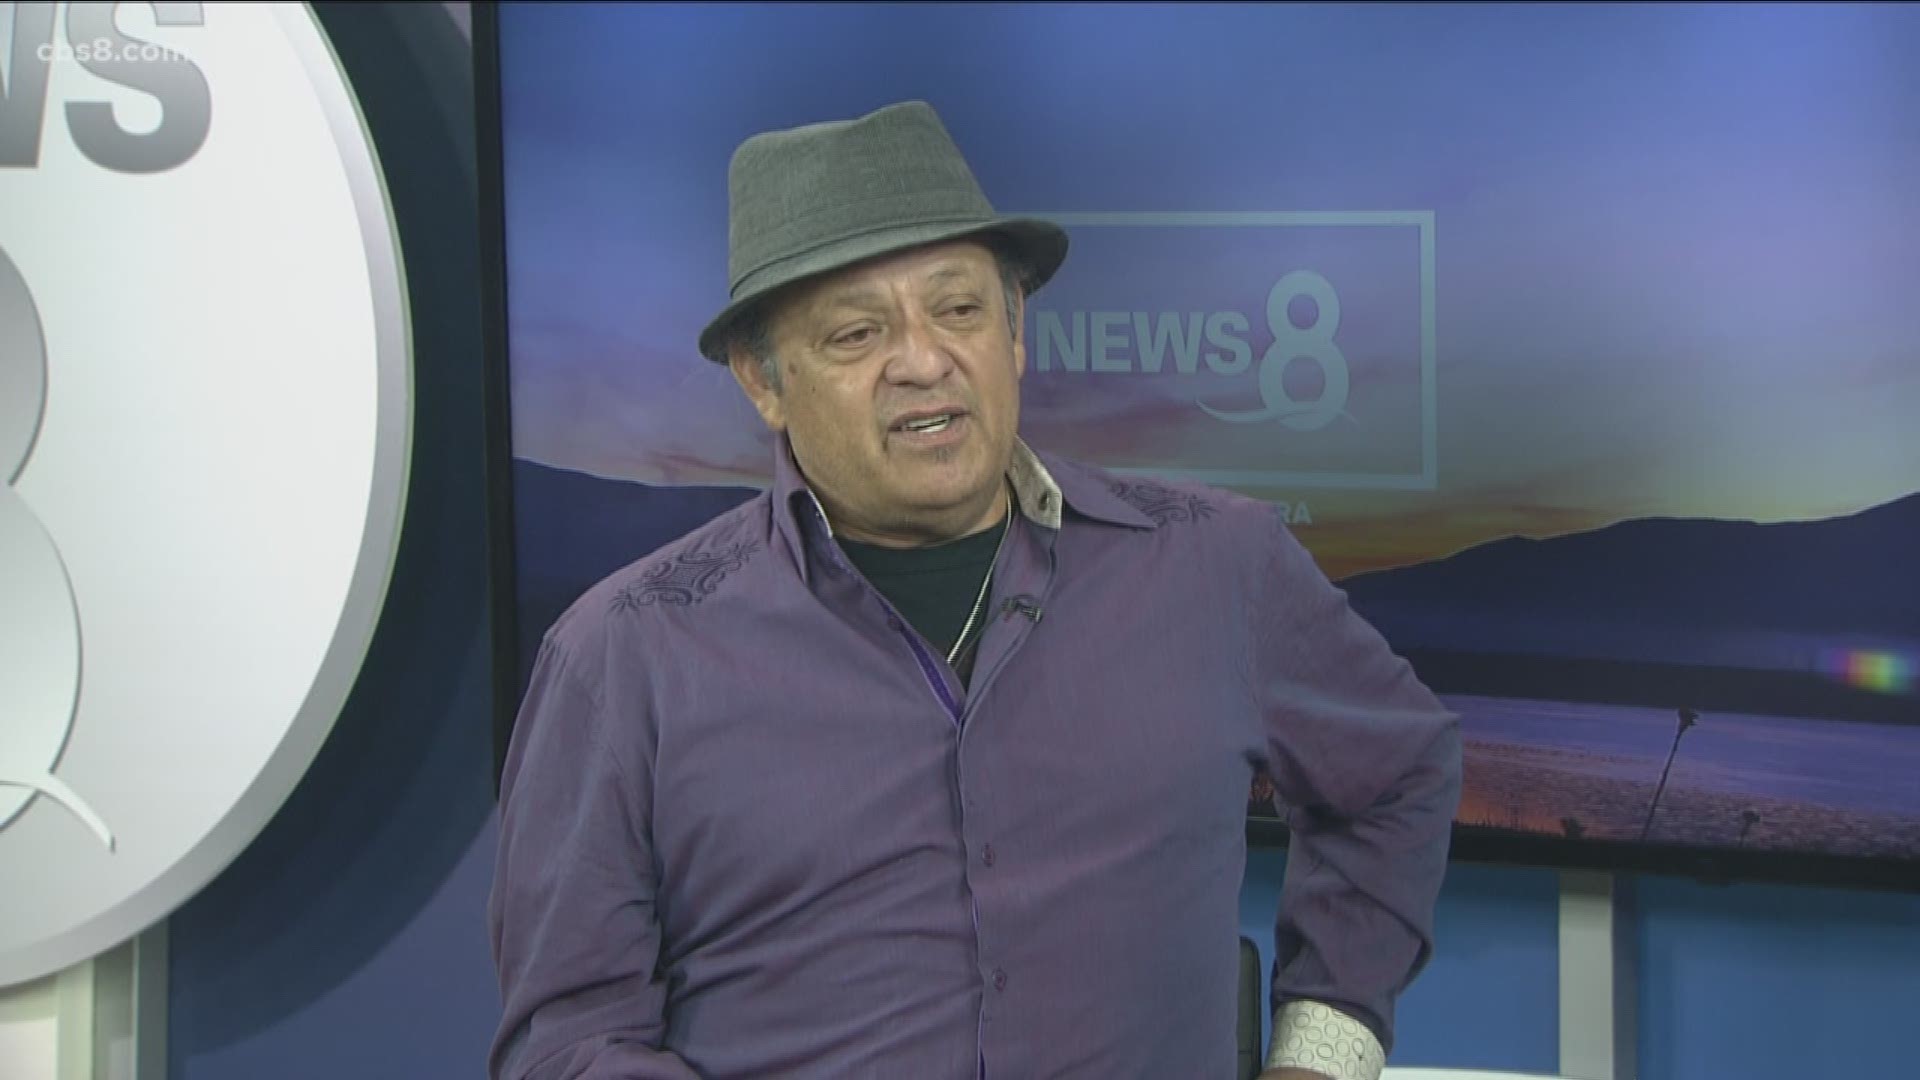 Paul Rodriguez will be on stage at Sycuan Casino on Saturday, February 22 for two separate shows.